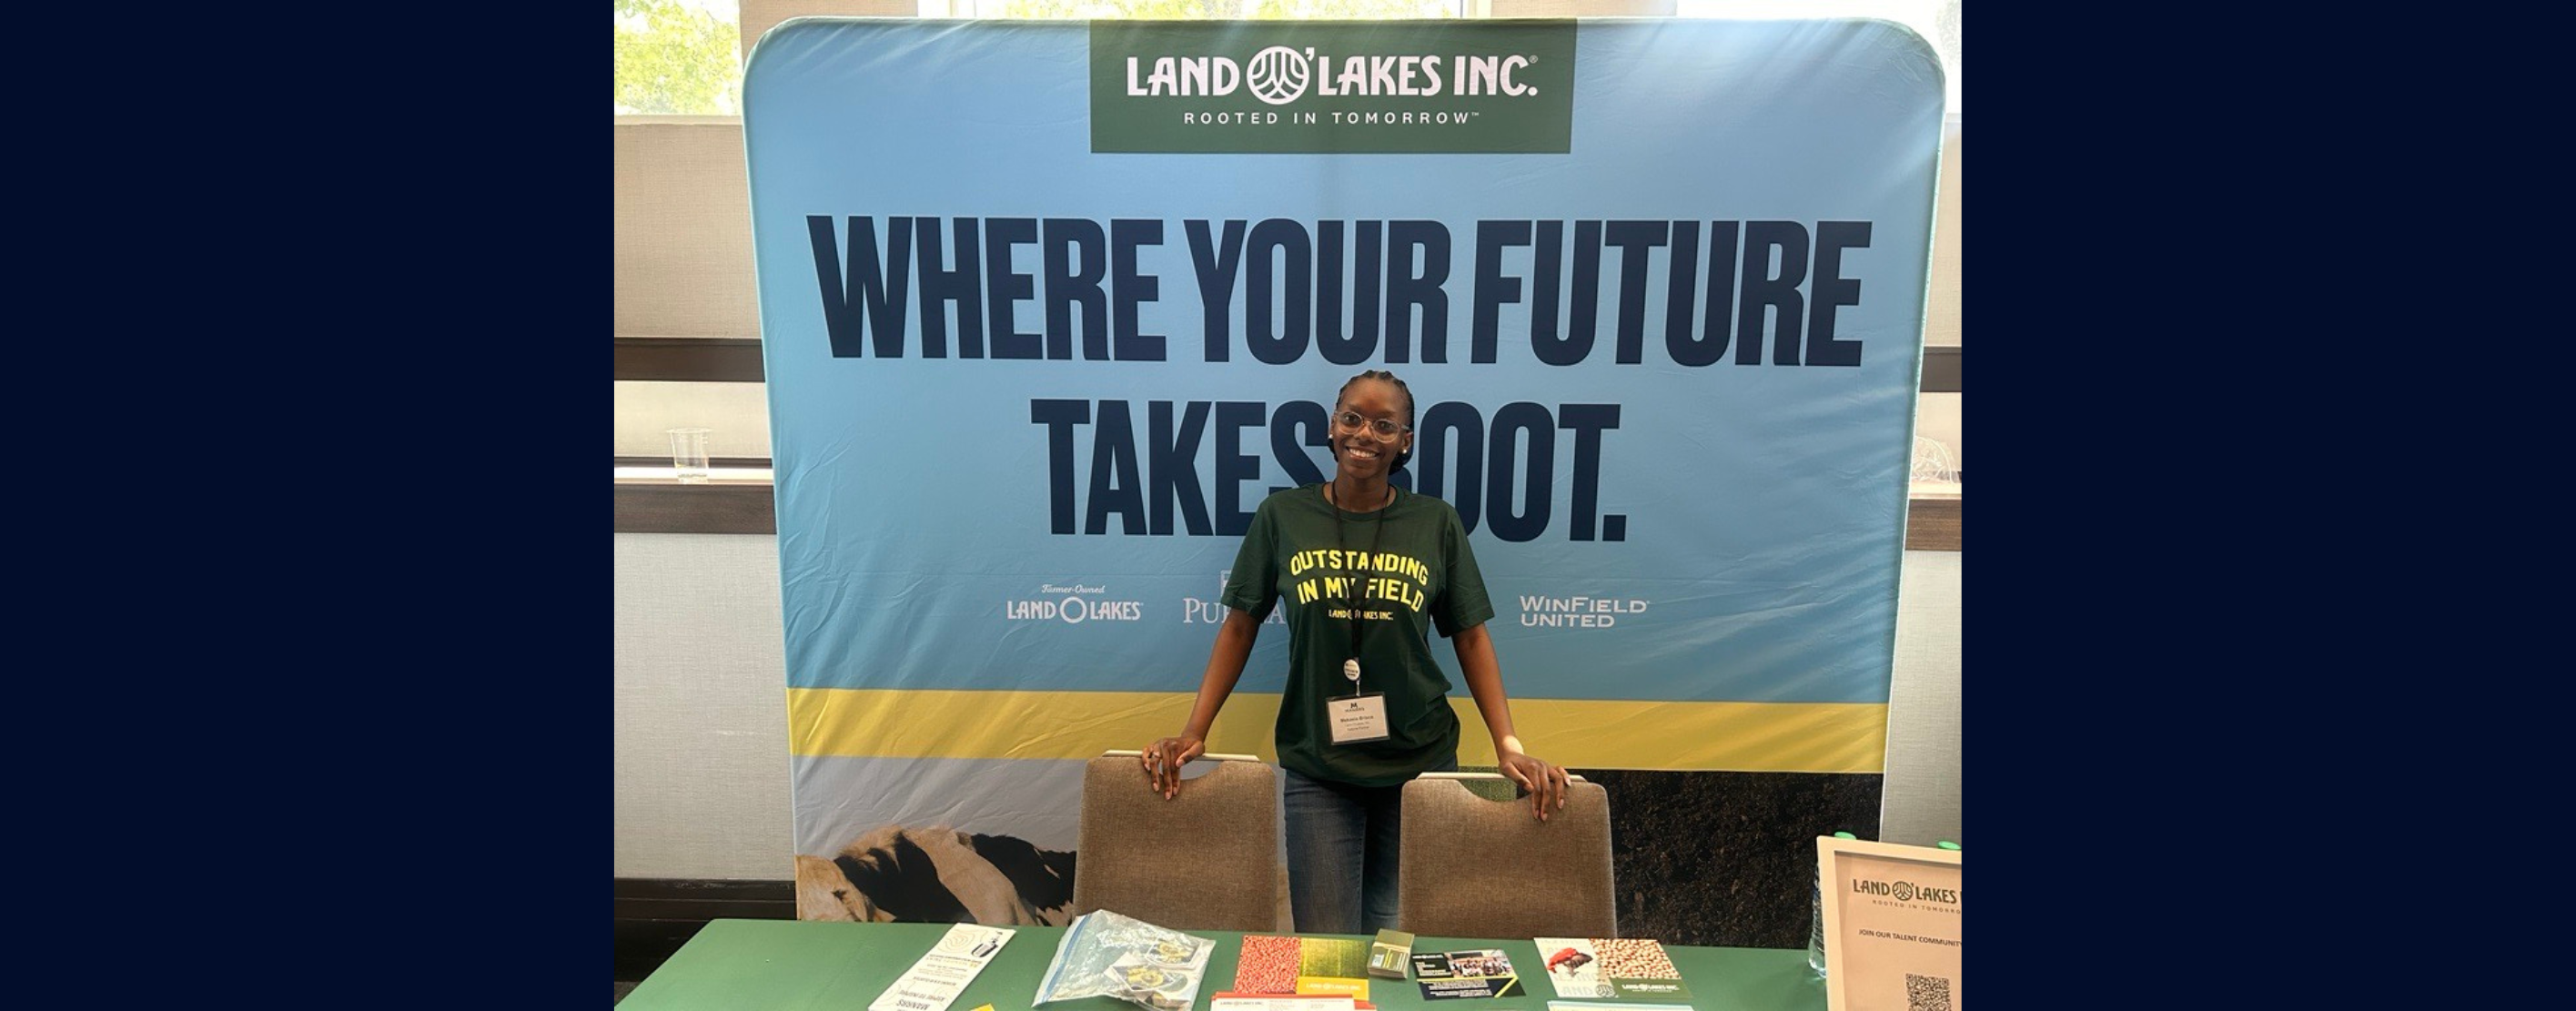 Mekaela stands at a job fair booth with a "Where Your Future Takes Root" banner behind her